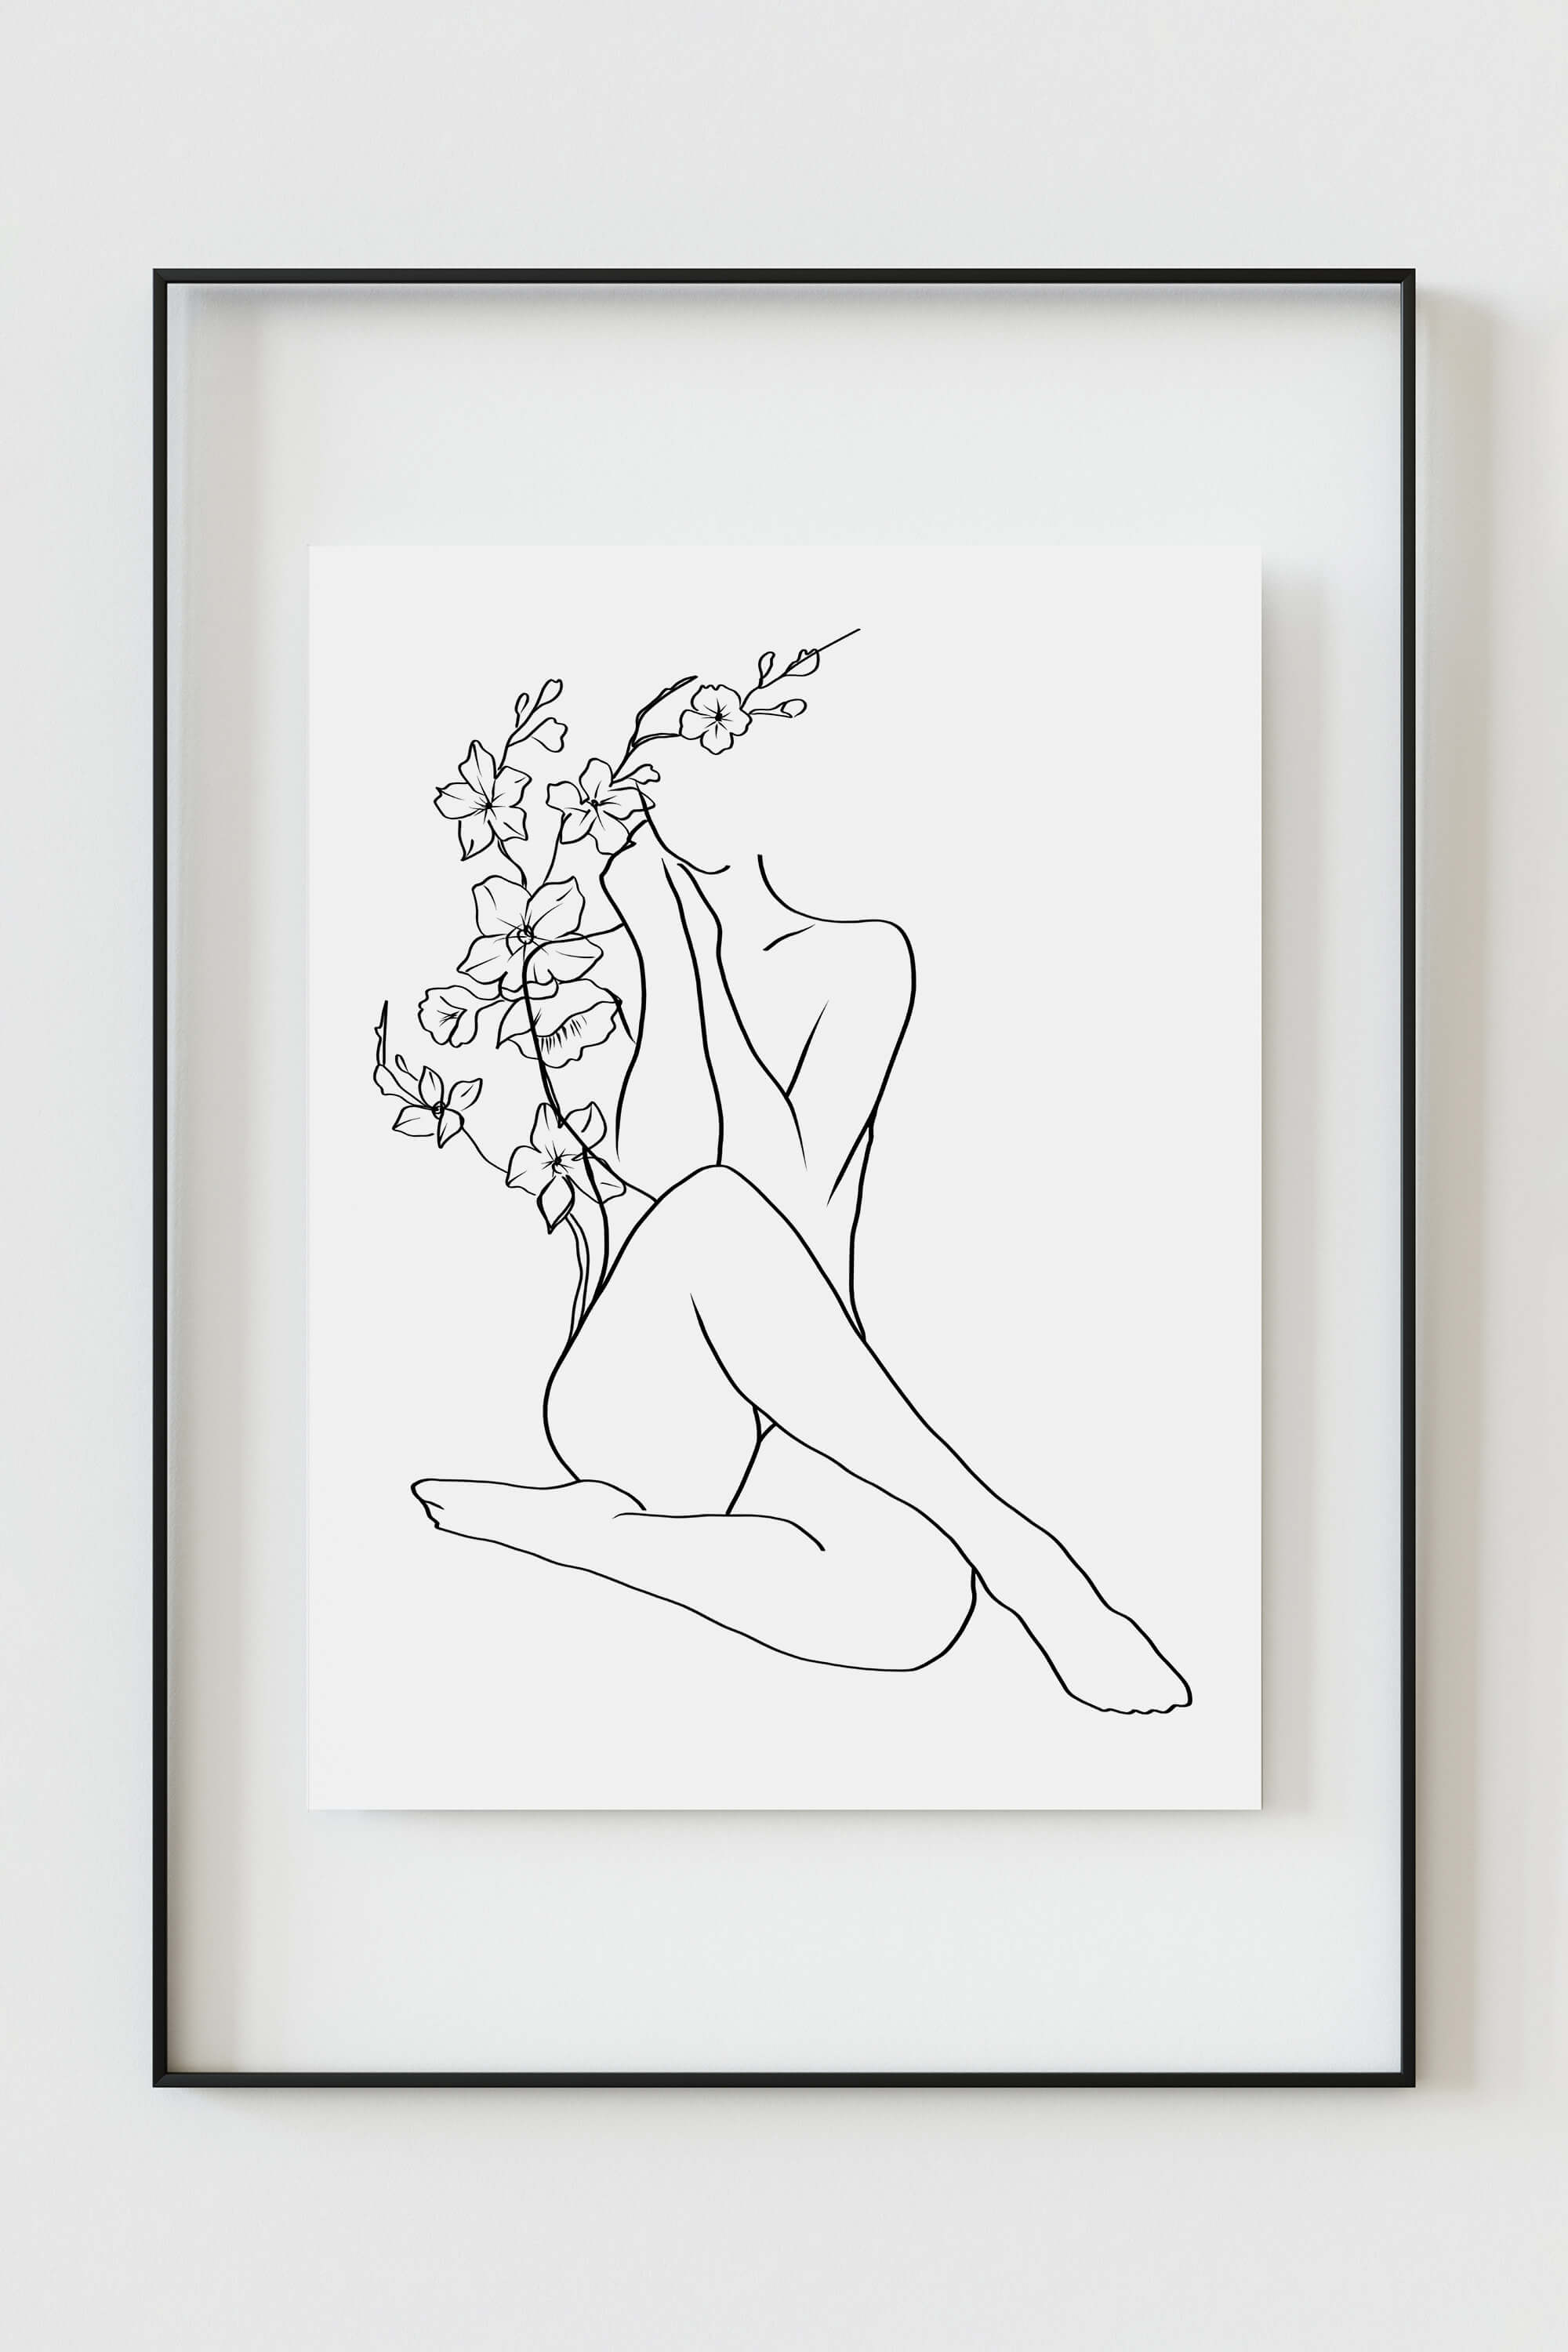 Contemporary feminine female body poster in black and white, setting trends in home decor. A sophisticated addition to your space, resonating with classic femininity.